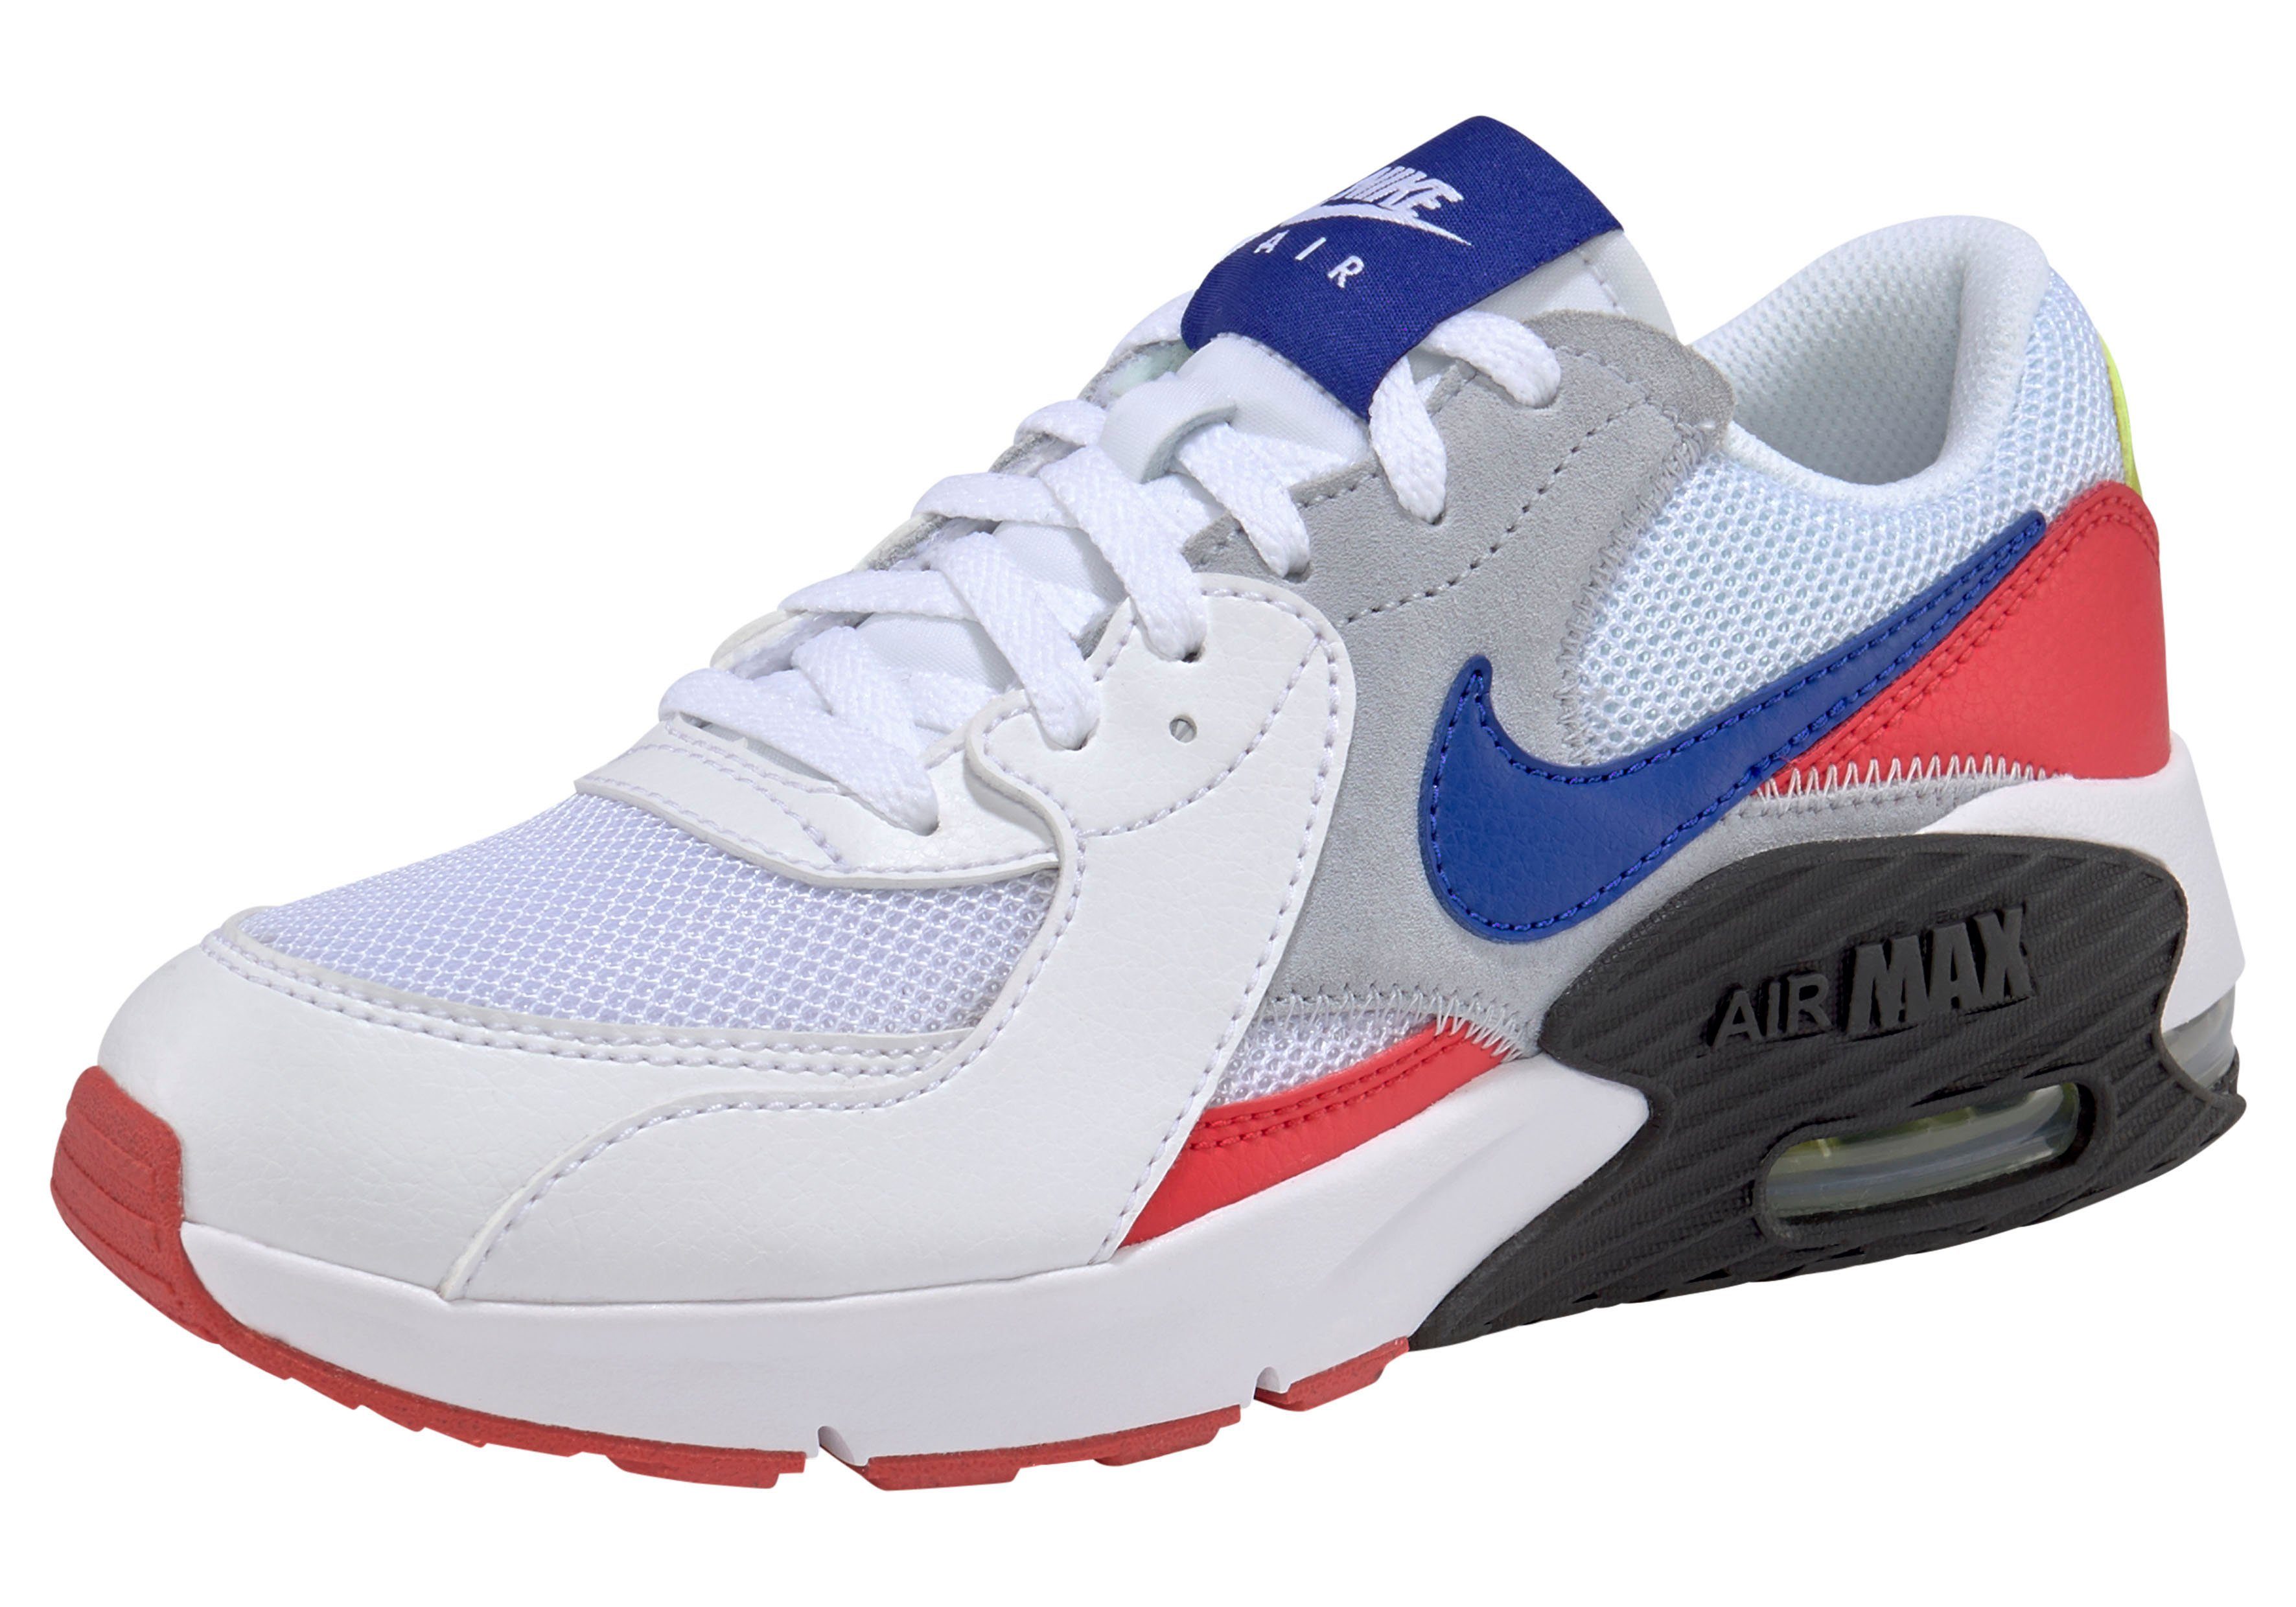 Nike Sportswear »Air Max Excee« Sneaker, Weiches Obermaterial aus Leder